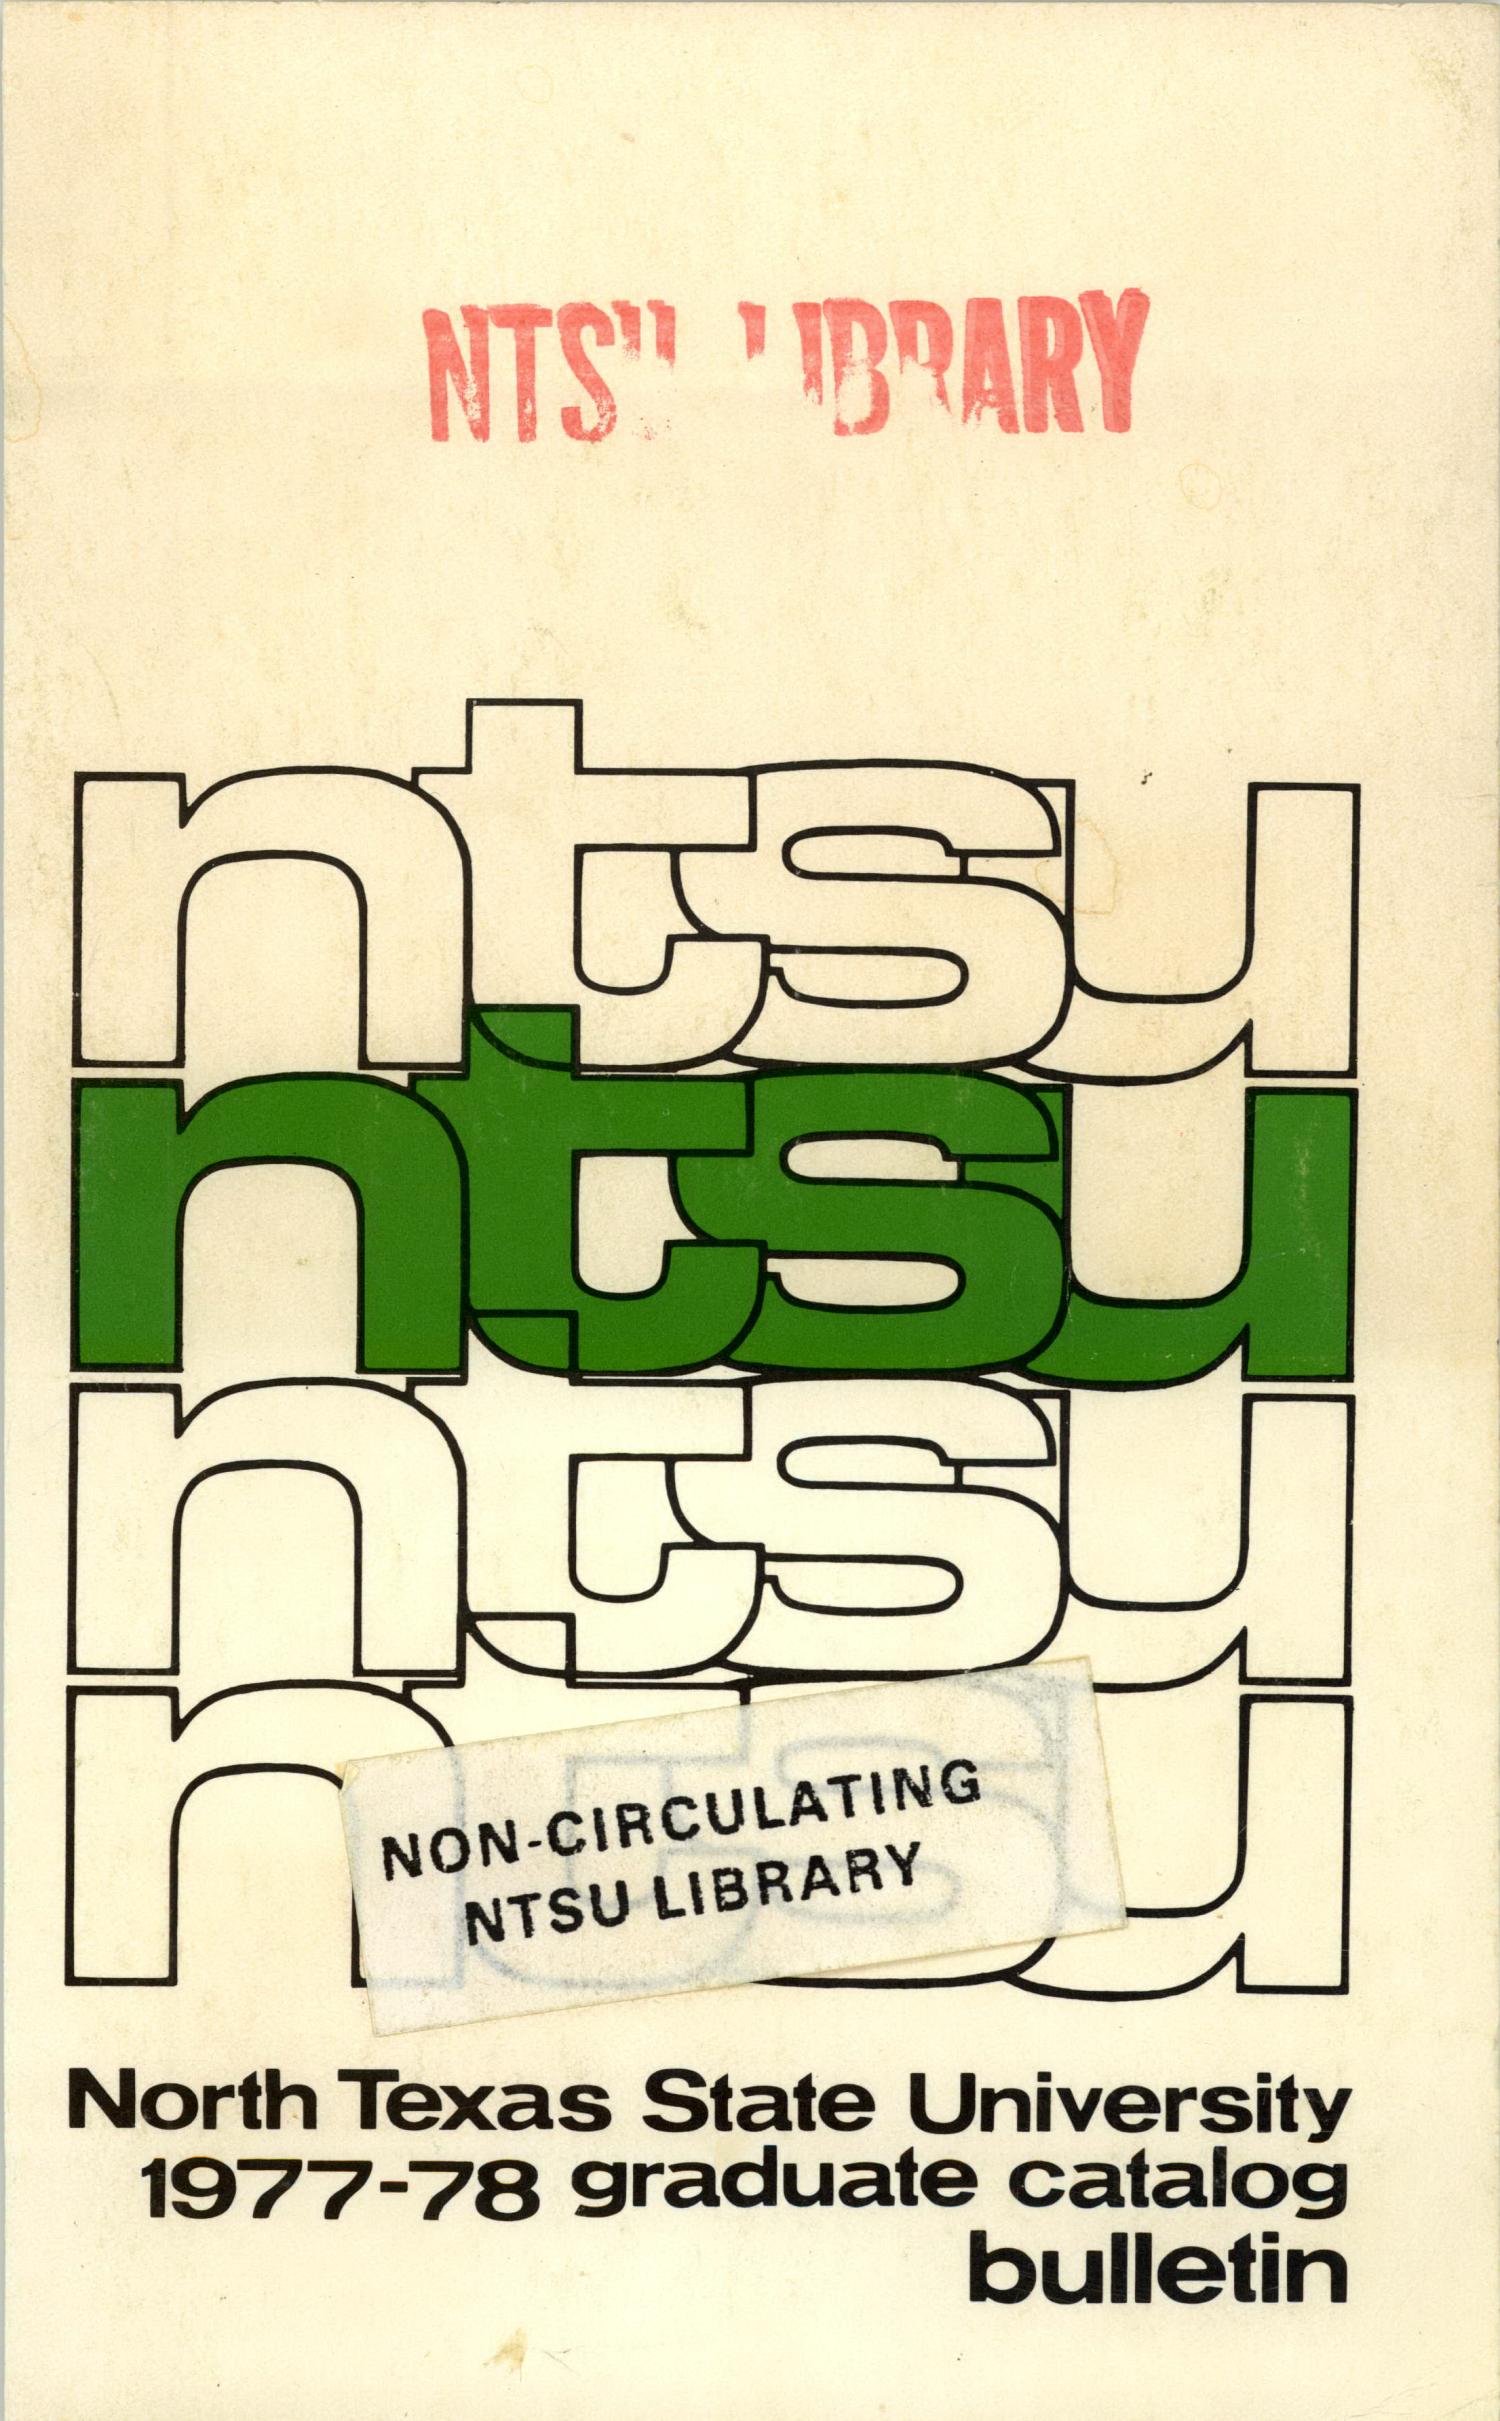 Catalog of North Texas State University, 1977-1978, Graduate
                                                
                                                    Front Cover
                                                